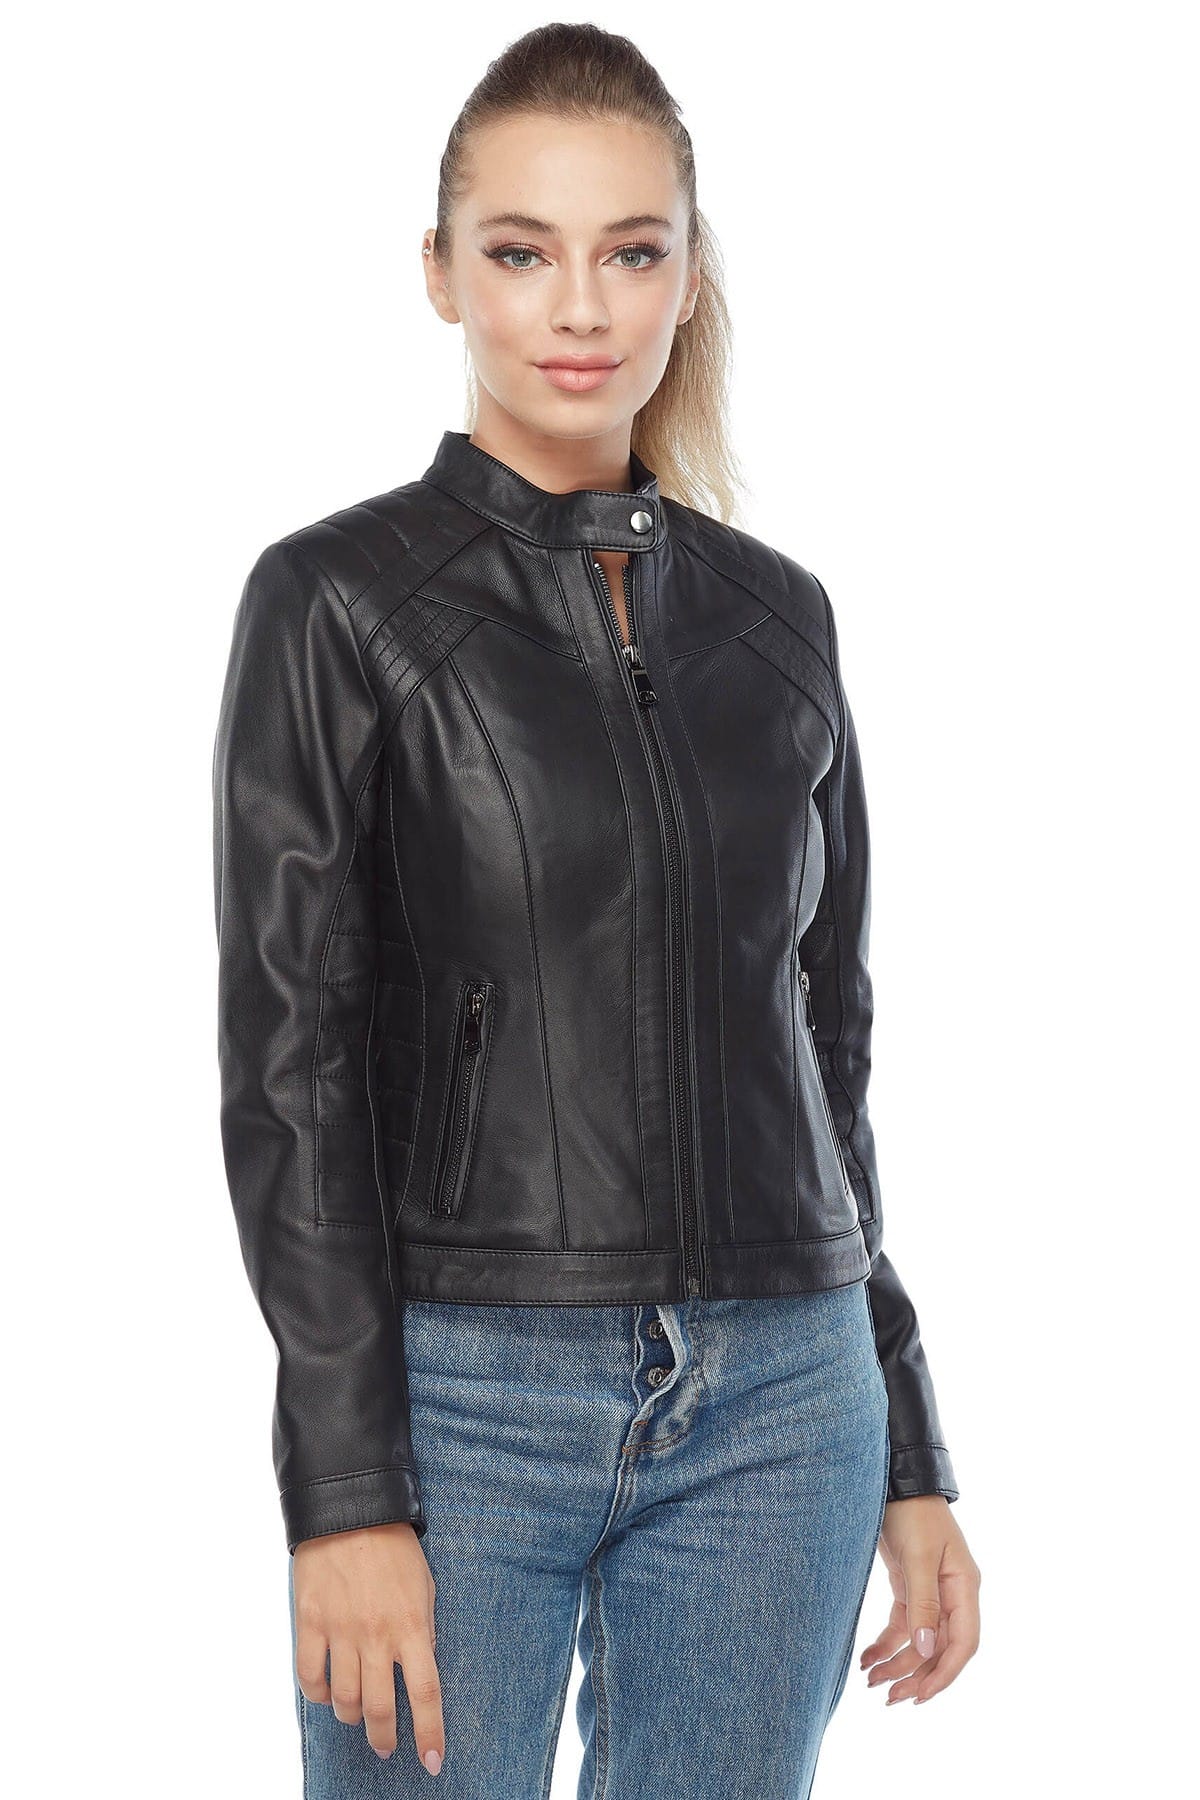 Rosa Women's 100 % Real Black Leather Jacket